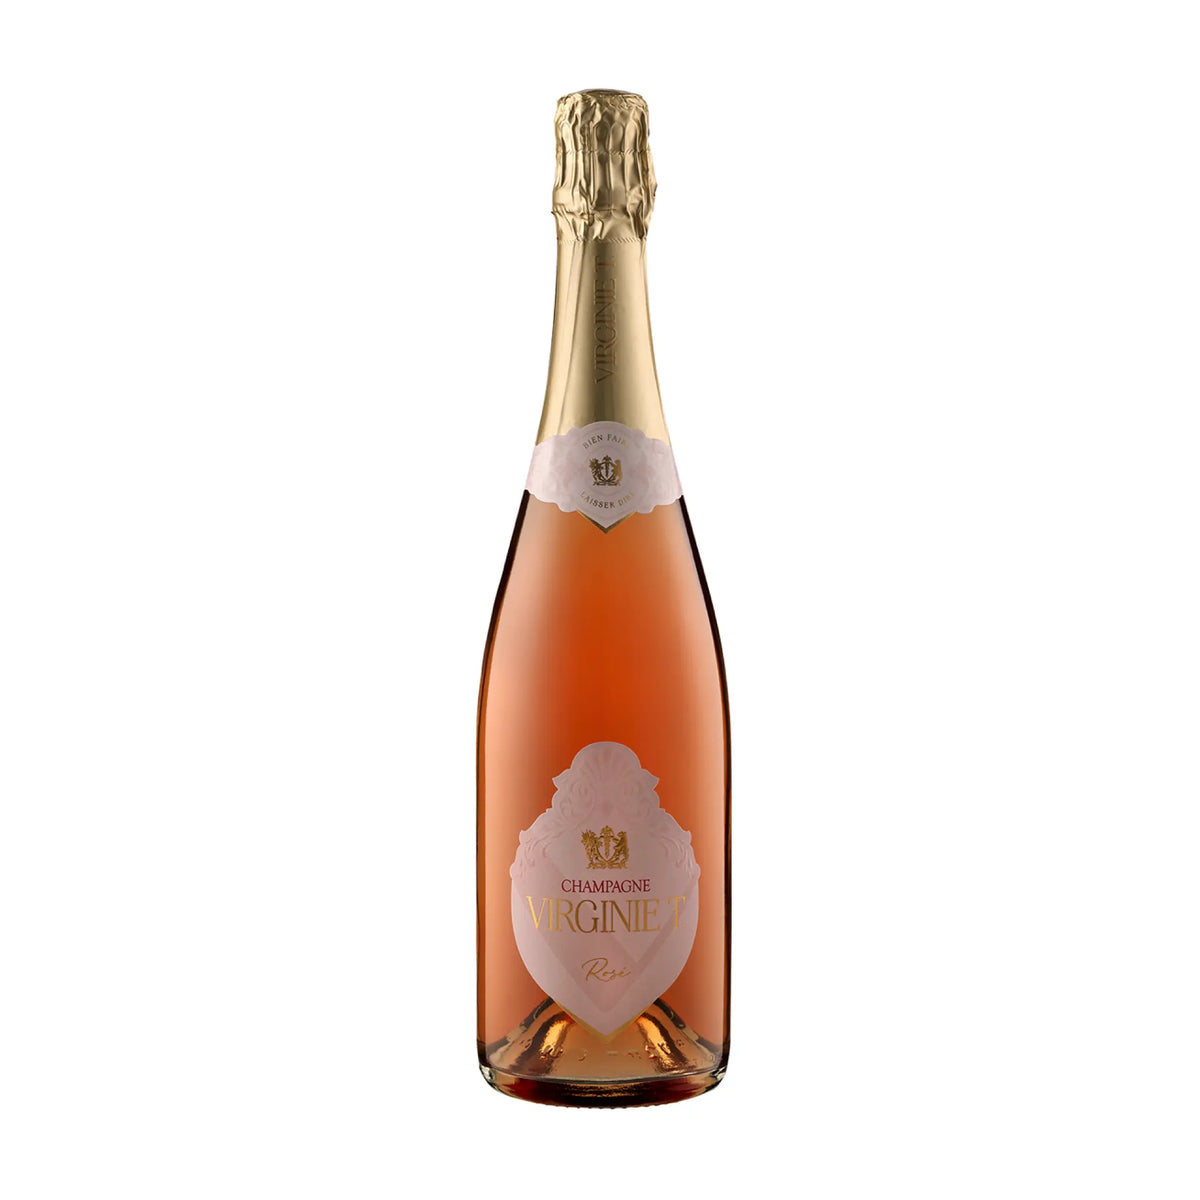 Champagne Virginie T.-Champagner-Champagner-Frankreich-Champagne-Champagne Virginie T. Rosé-WINECOM